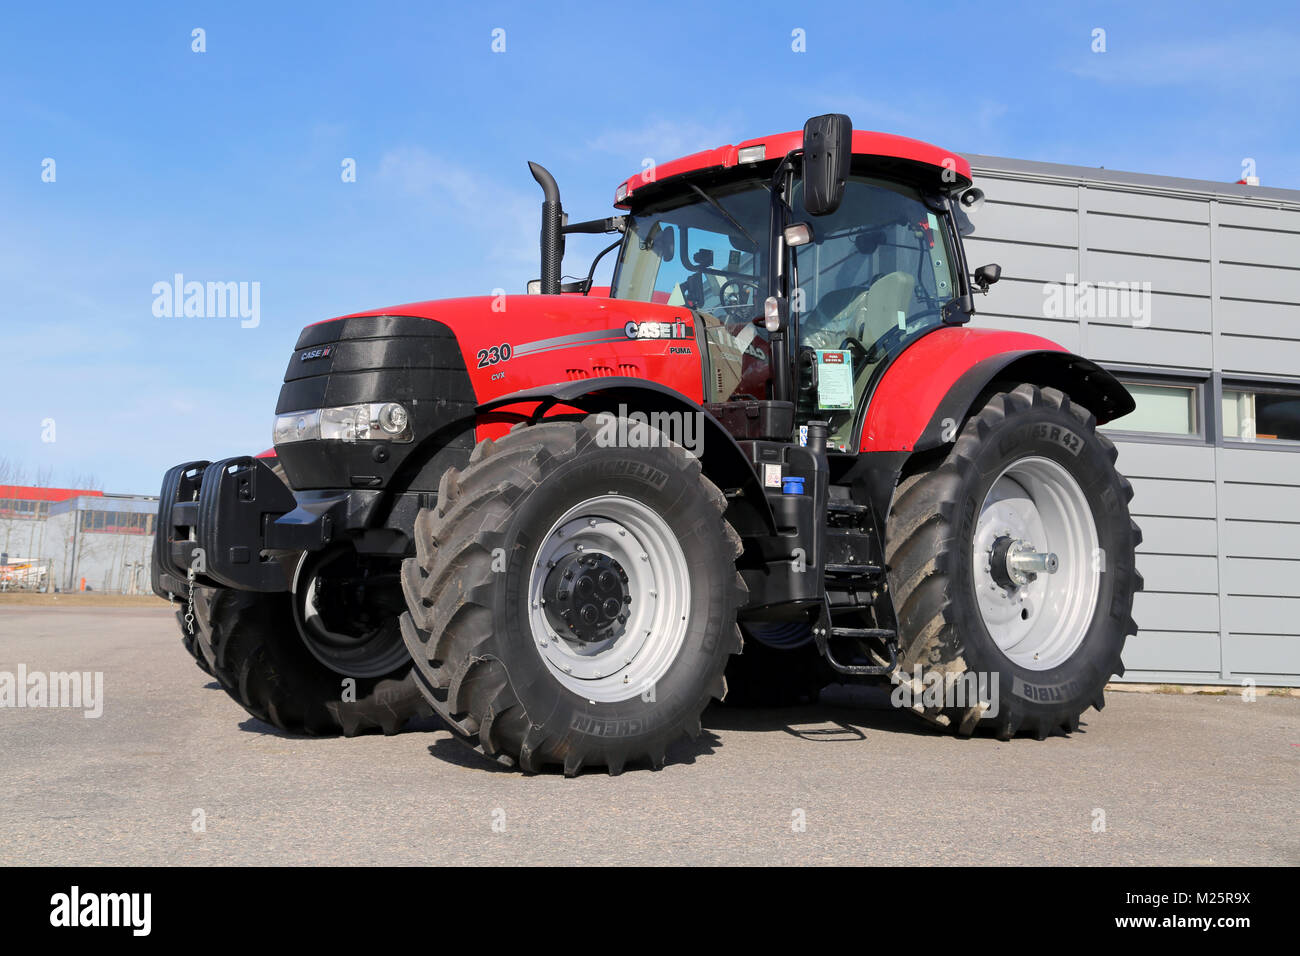 Symposium genetisch aansluiten TURKU, FINLAND - APRIL 5, 2014: Case IH Puma 230 CVX Dl agricultural  tractor on display. Case IH wins two gold medals at AGROTECH - the 20th  Internati Stock Photo - Alamy